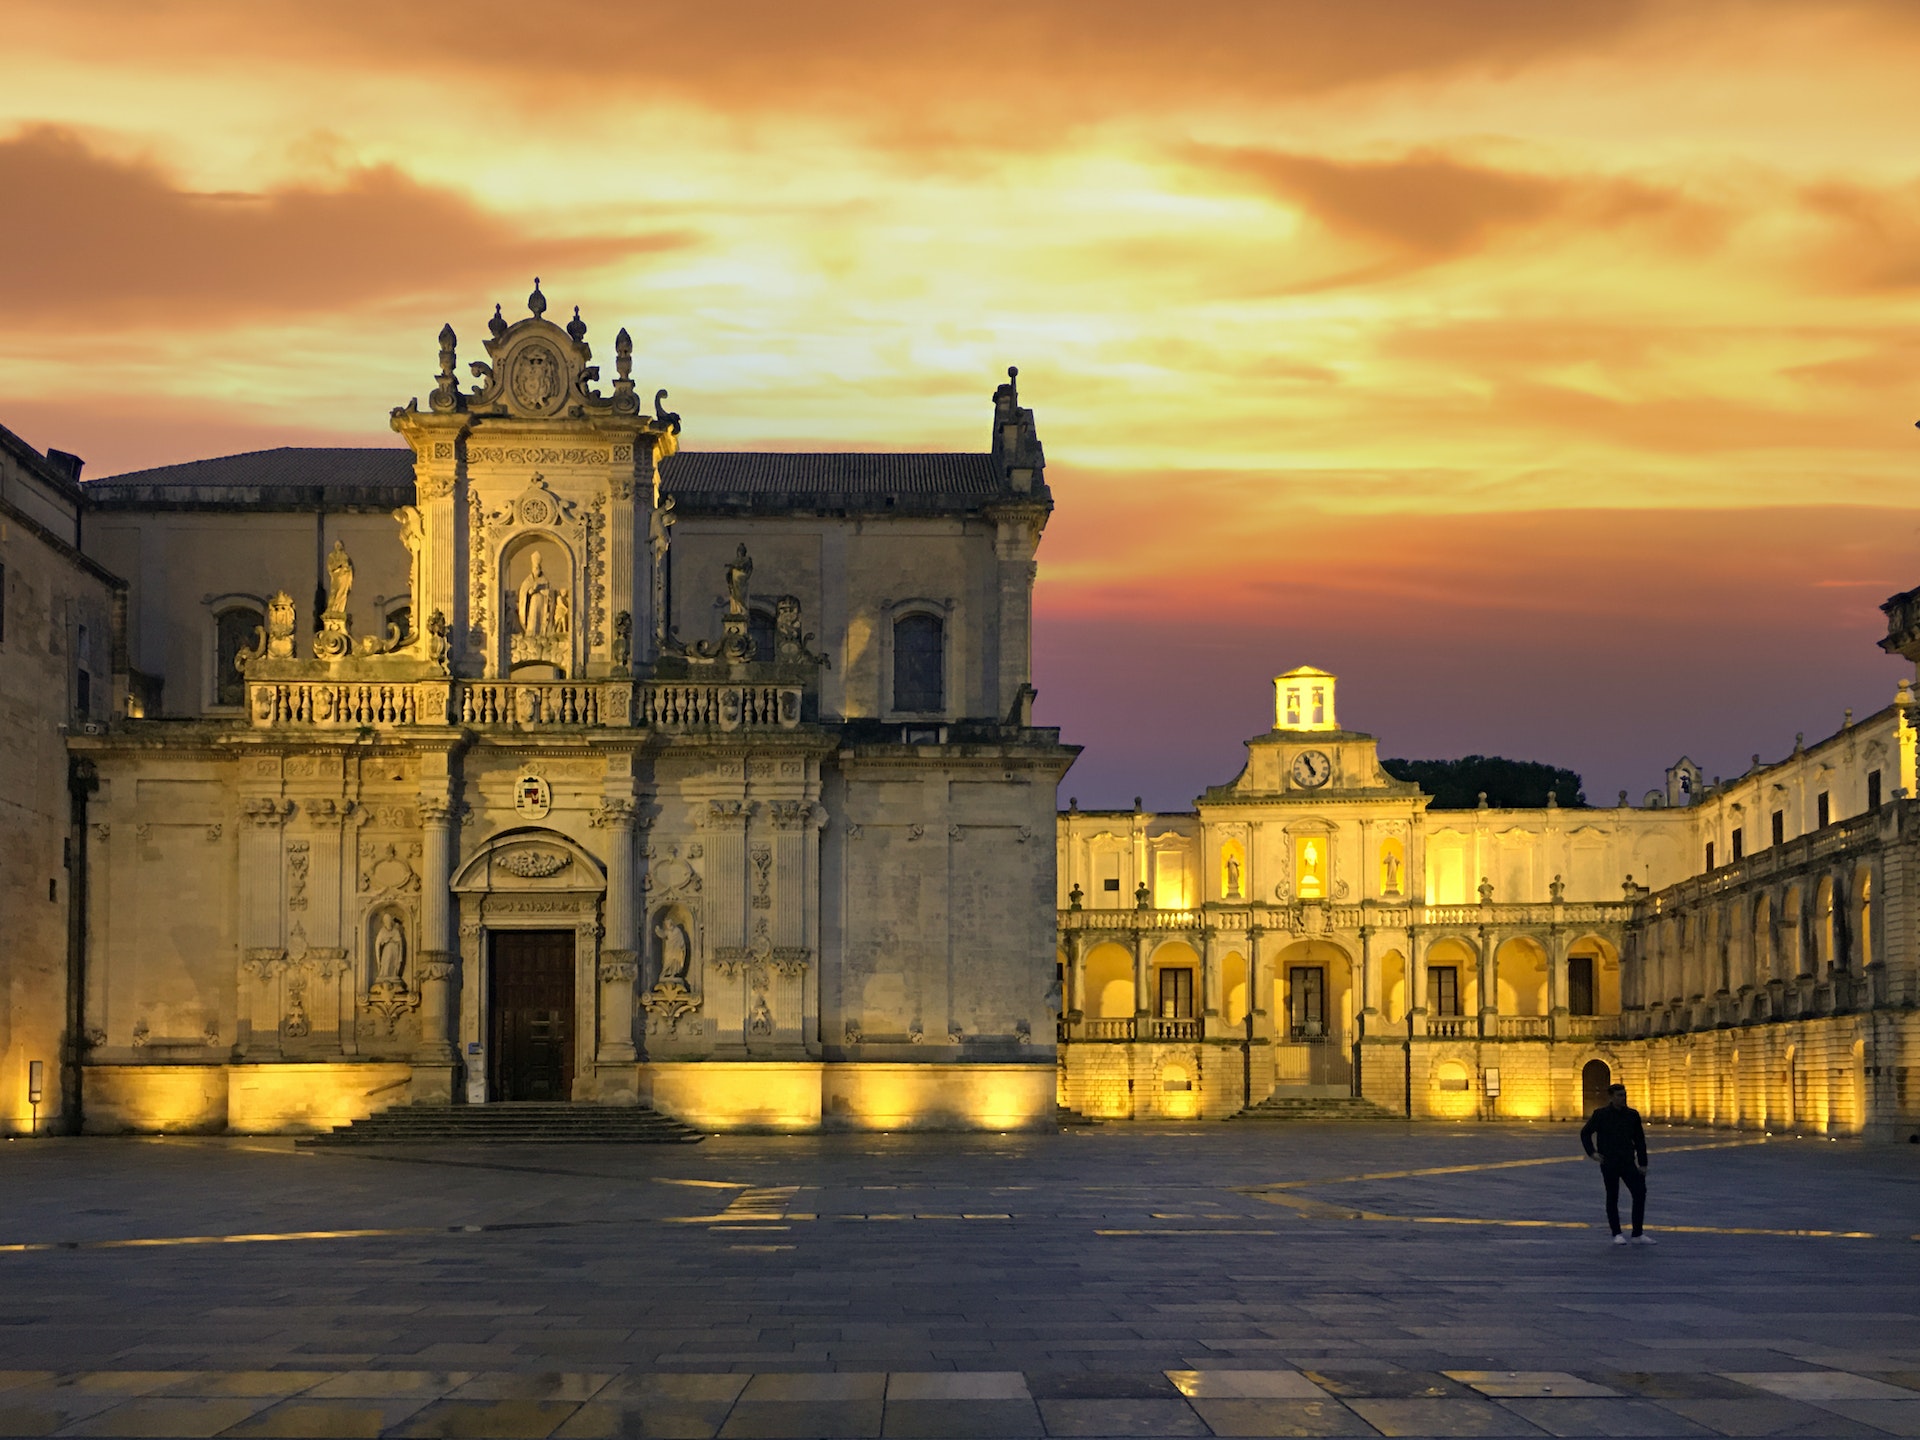 Sunset behind Lecce Cathedral as a person walks through the plaza